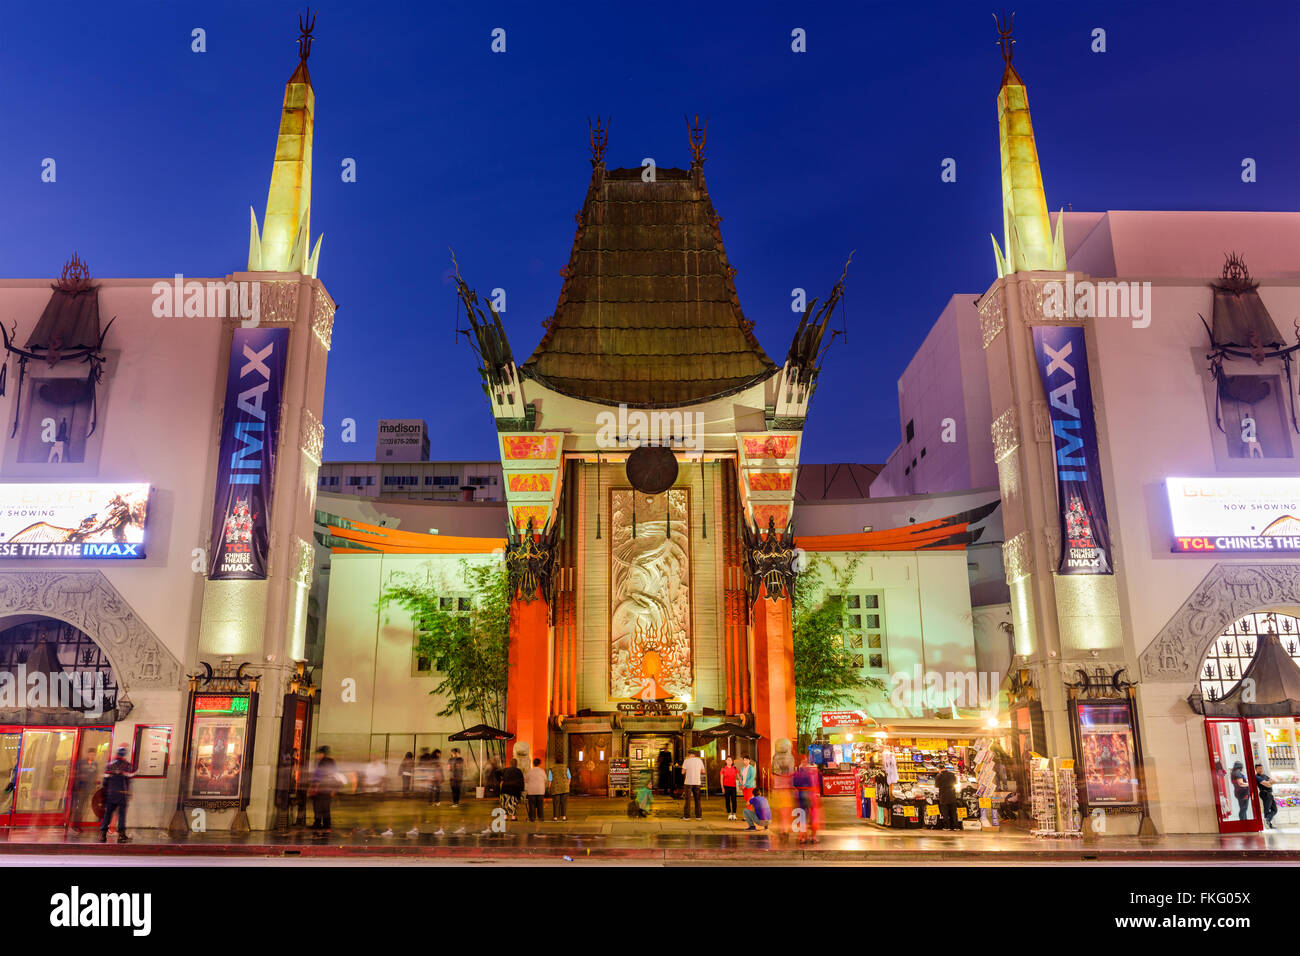 Graumans Chinese Theatre am Hollywood Boulevard in Hollywood, Kalifornien, USA. Stockfoto